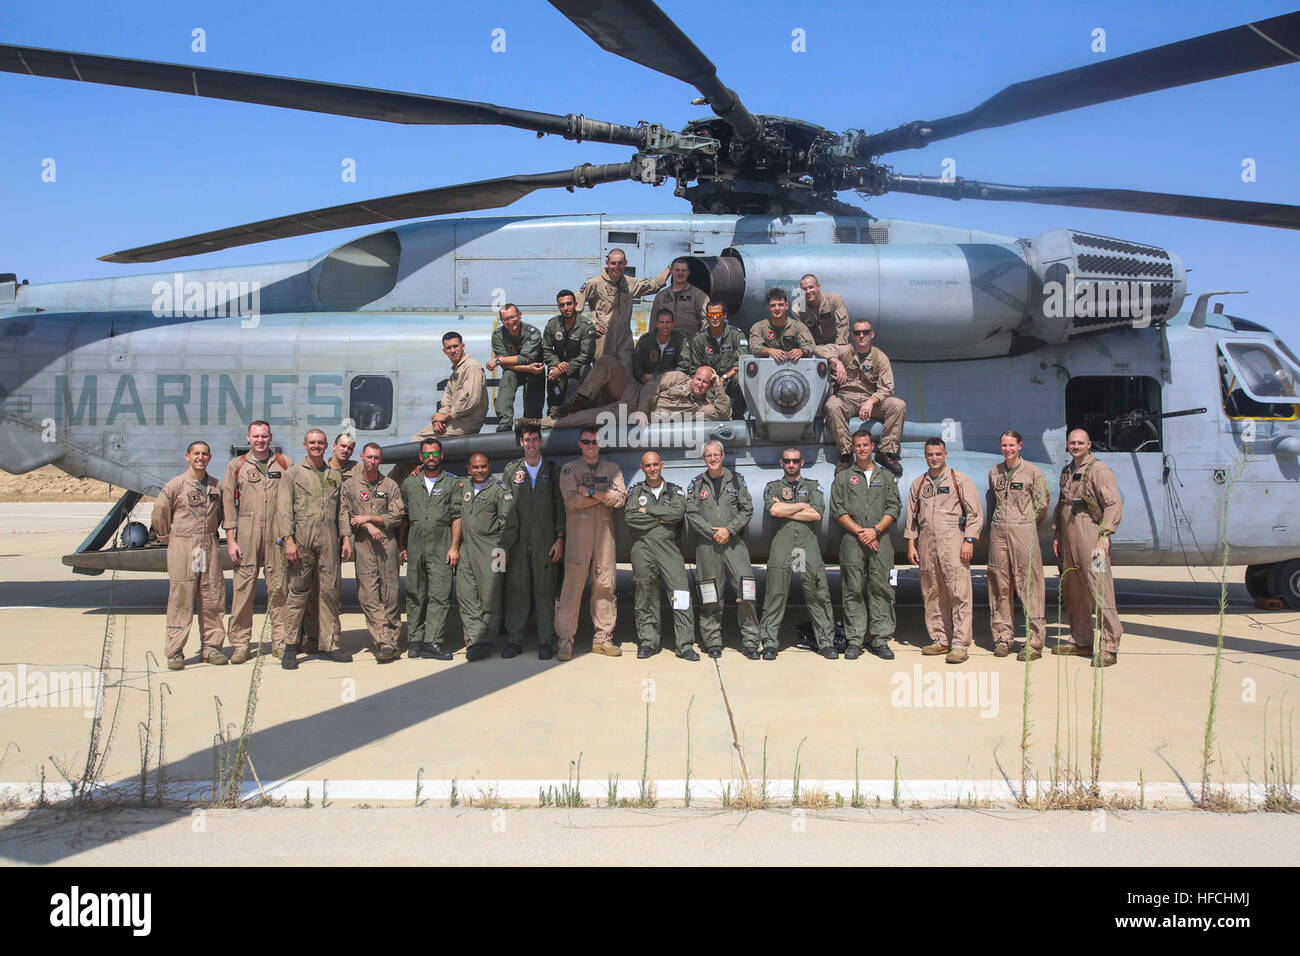 160720-M-KK554-251 ISRAEL DEFENSE FORCES NATIONAL TRAINING CENTER, Israel (July 20, 2016) U.S. Marines with Marine Medium Tiltrotor Squadron 264 (Reinforced), 22nd Marine Expeditionary Unit (MEU), and Israel Defense Force Soldiers pose in front of a CH-53E Super Stallion helicopter July 20, 2016, during Noble Shirley 16, a bilateral training exercise between the militaries. 22nd MEU, deployed with the Wasp Amphibious Ready Group, is conducting naval operations in the U.S. 6th fleet area of operations in support of U.S. national security interests in Europe. (U.S. Marine Corps photo by Sgt. Rya Stock Photo